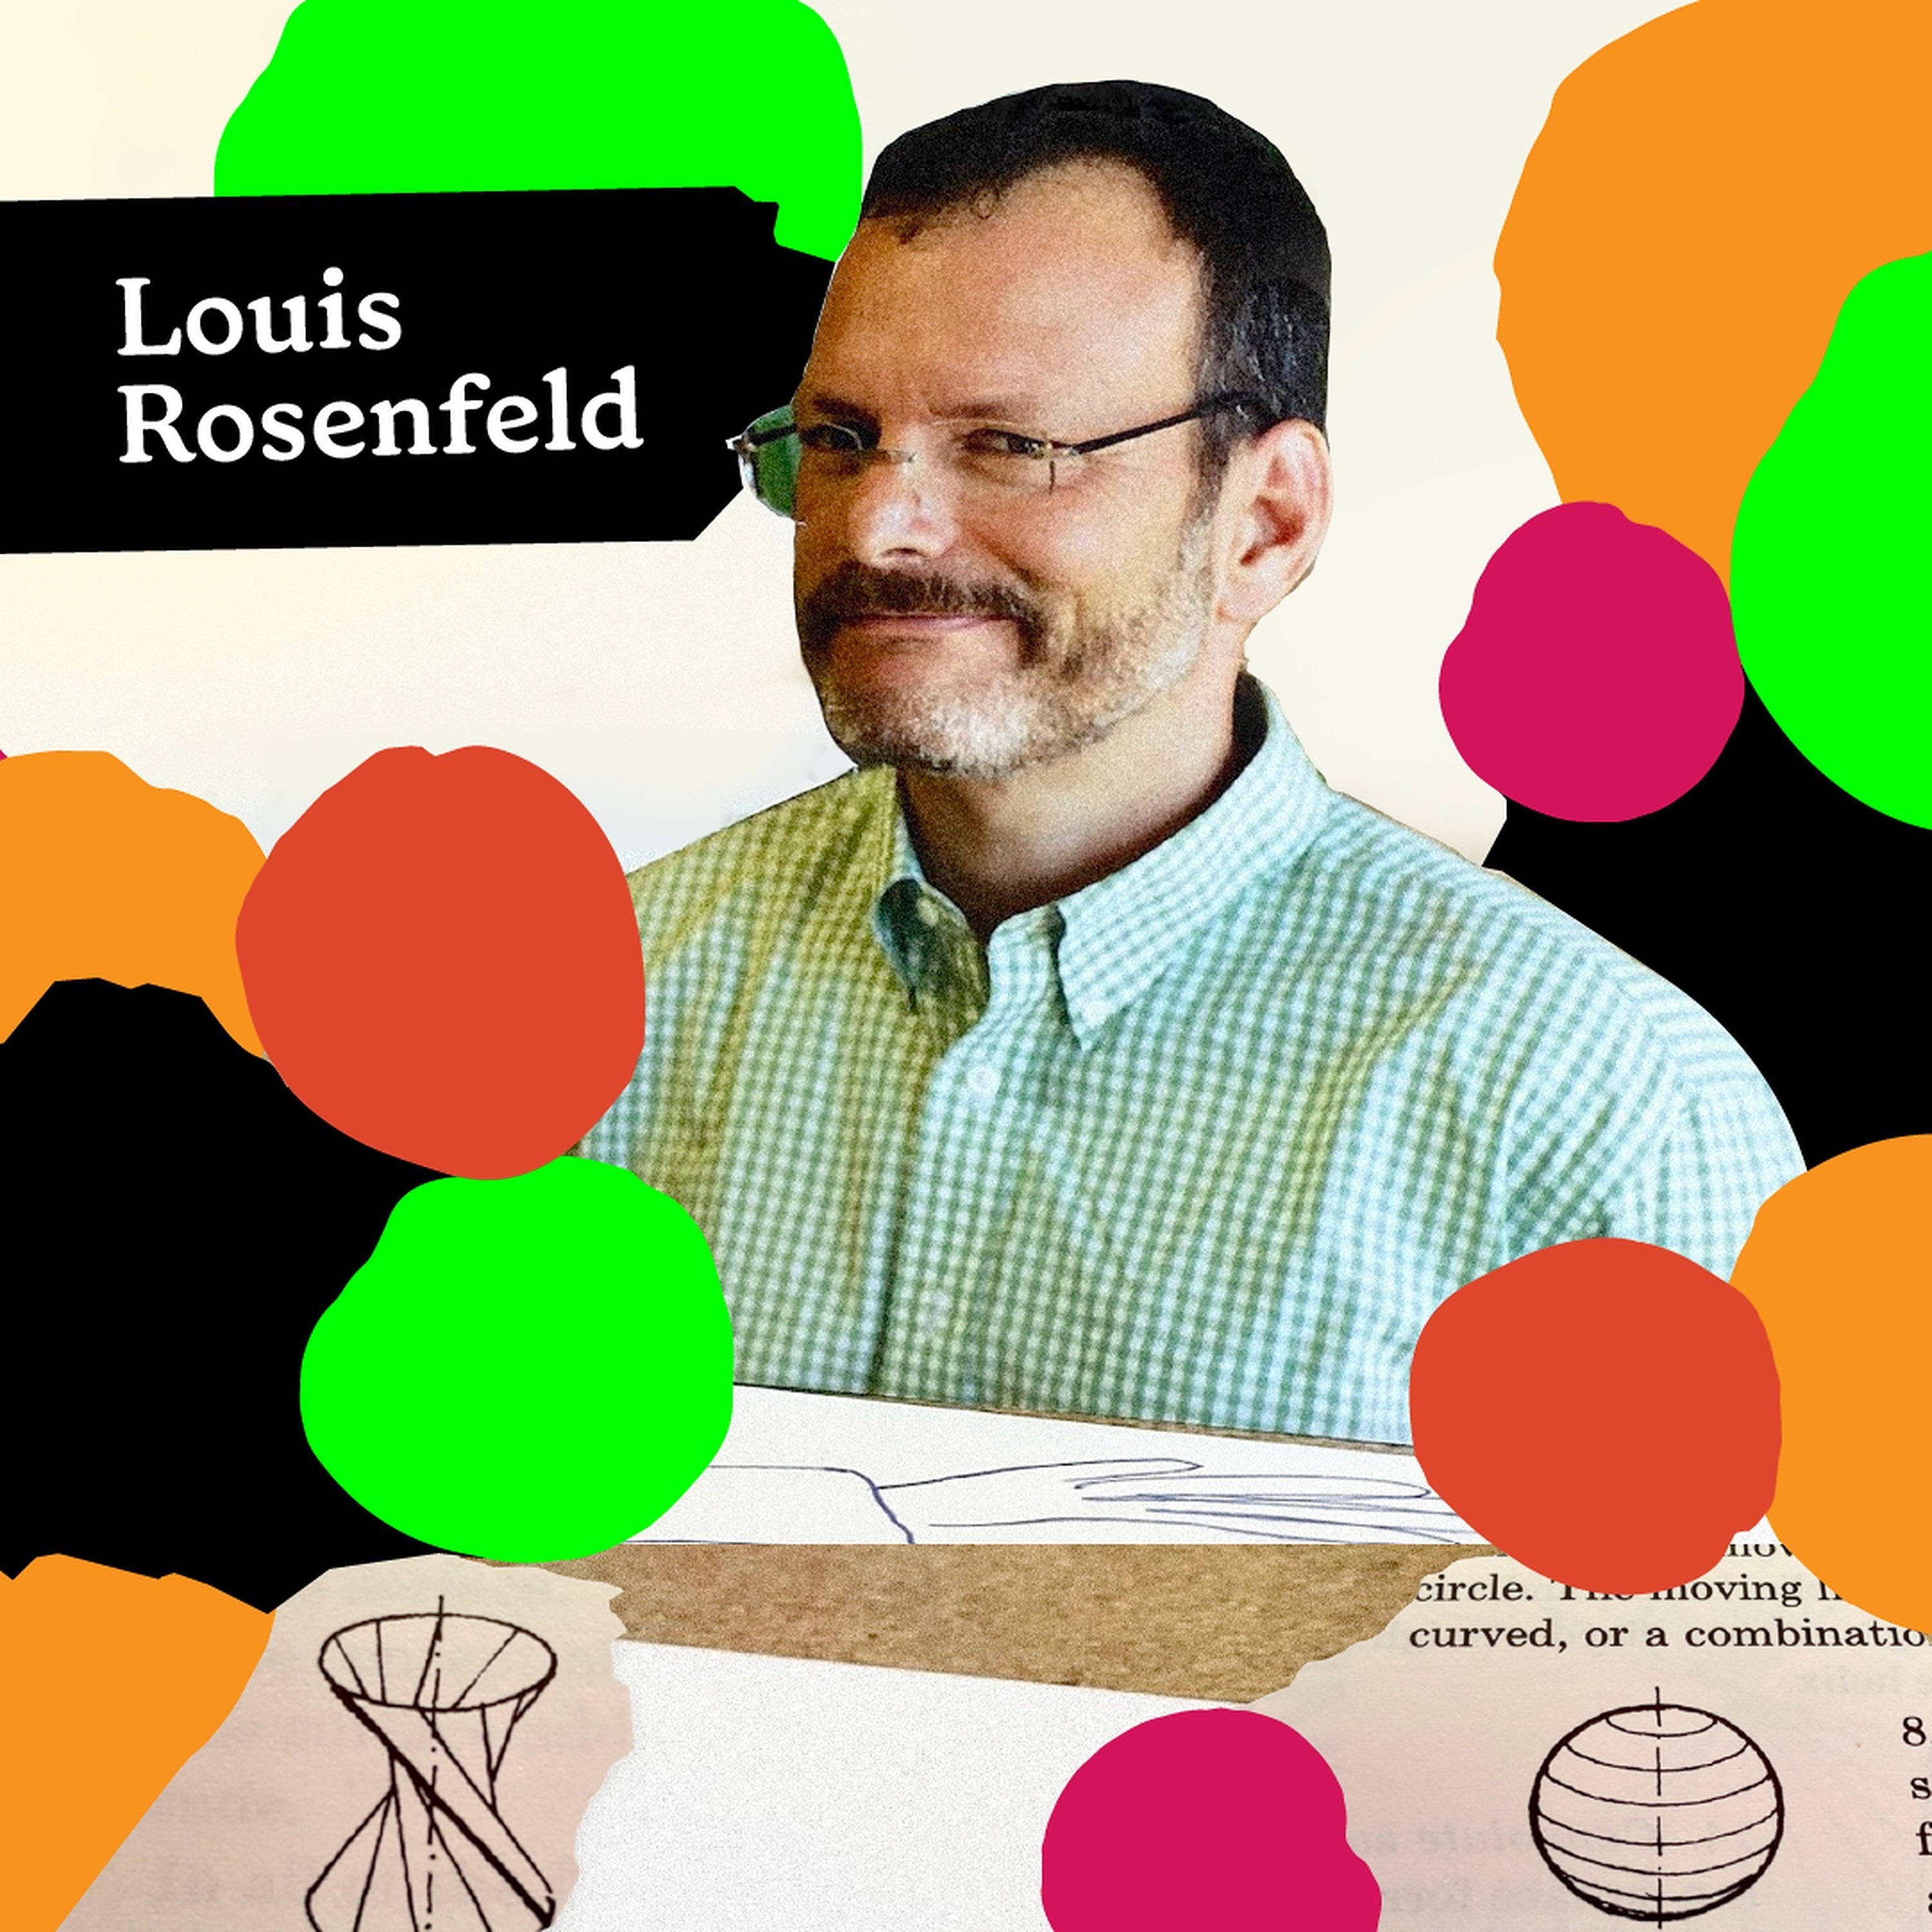 Louis Rosenfeld on how UX design can close the gaps between people